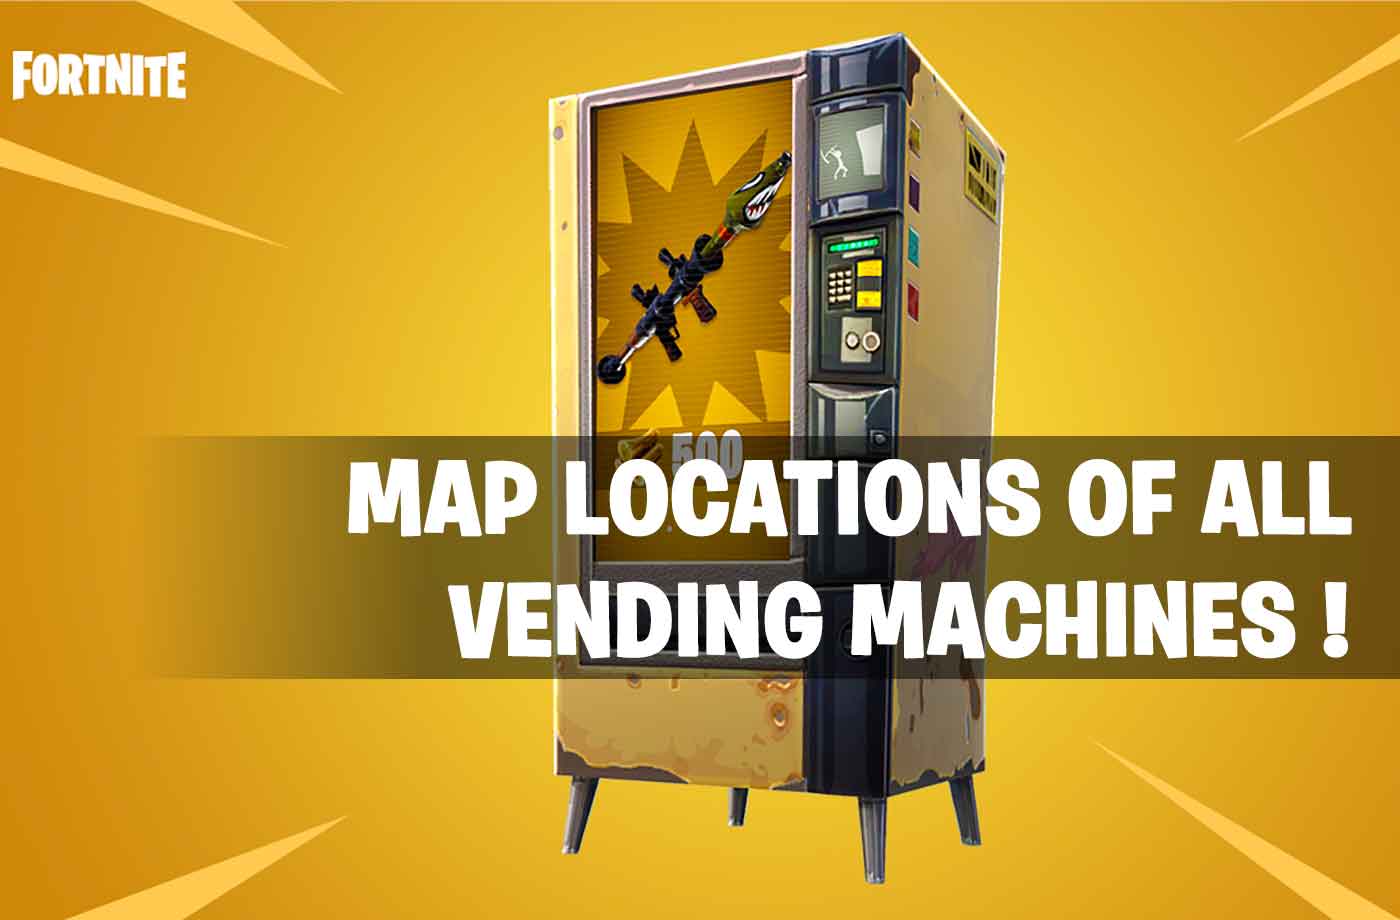 Fortnite Battle Royale Map Locations Of All Vending Machines - f!   ortnite battle royale map locations of all vending machines